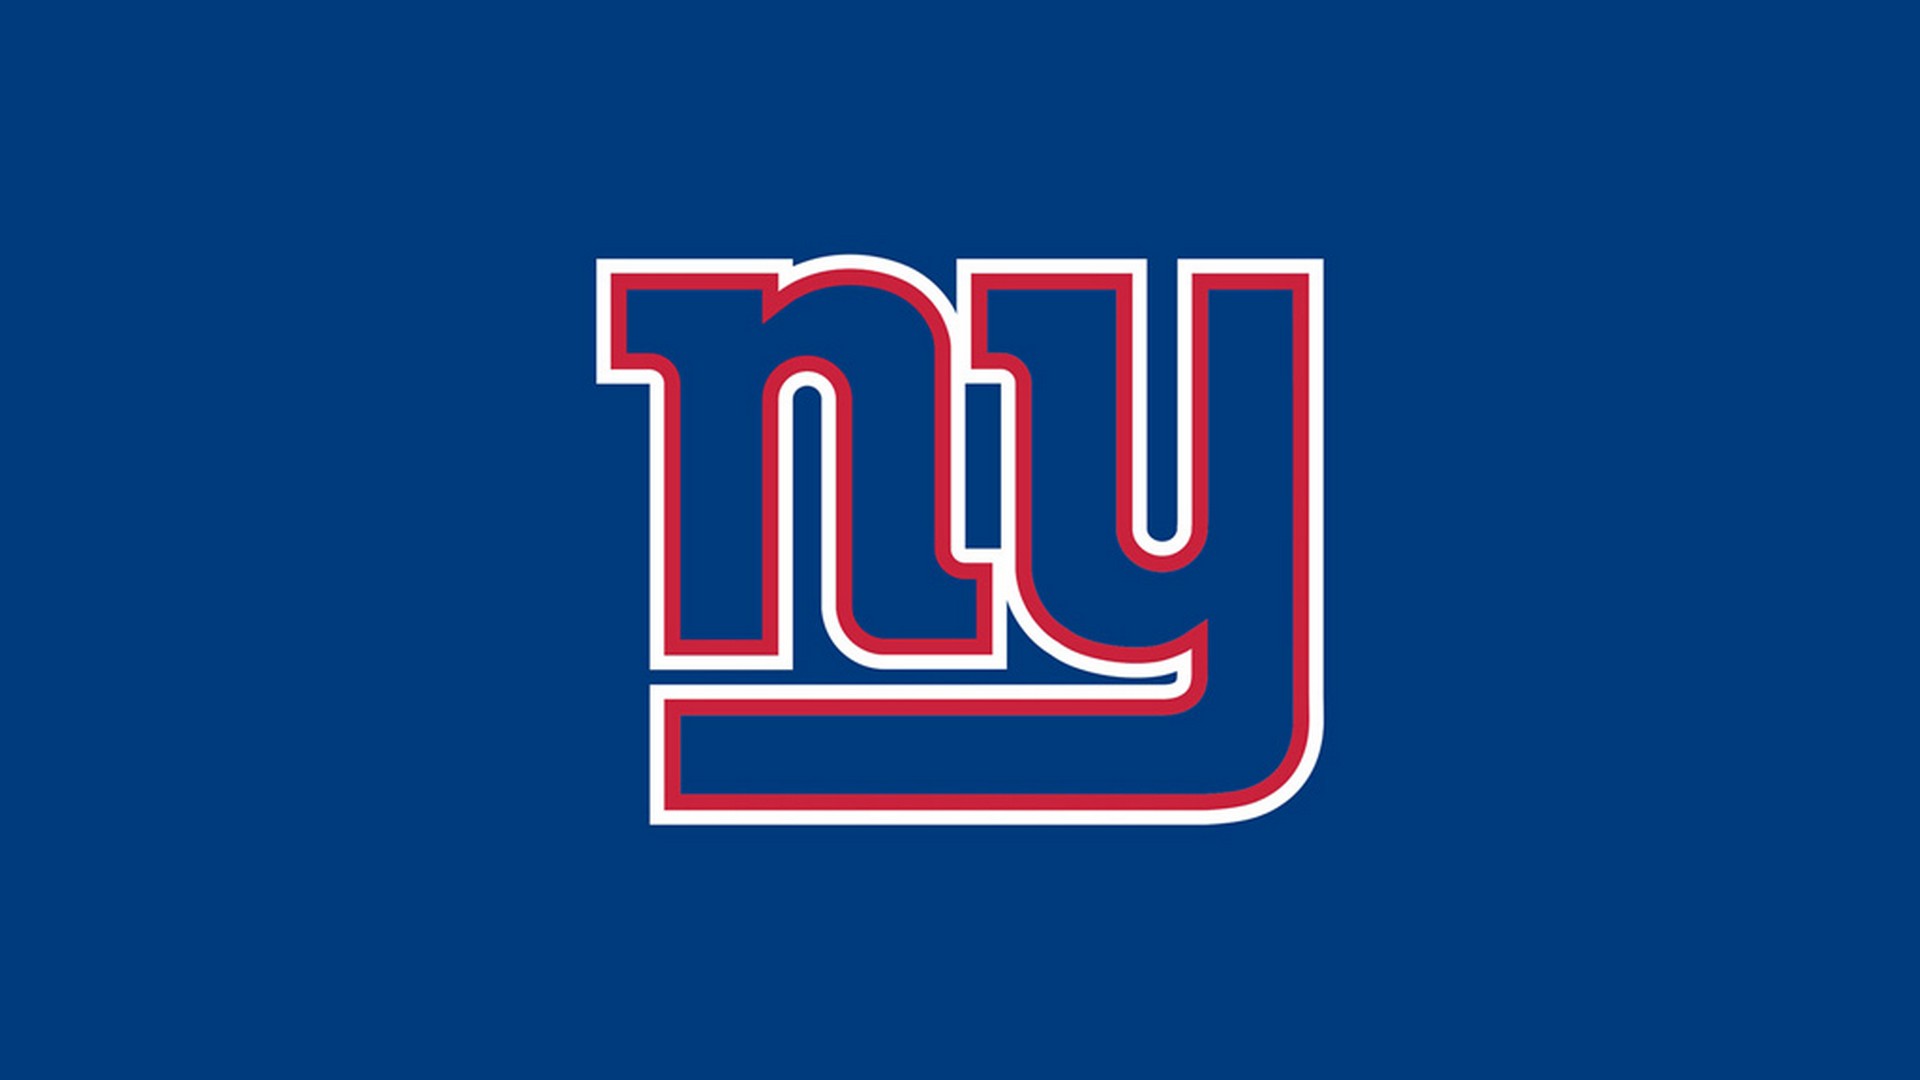 New York Giants Desktop Wallpaper With high-resolution 1920X1080 pixel. You can use this wallpaper for your Mac or Windows Desktop Background, iPhone, Android or Tablet and another Smartphone device